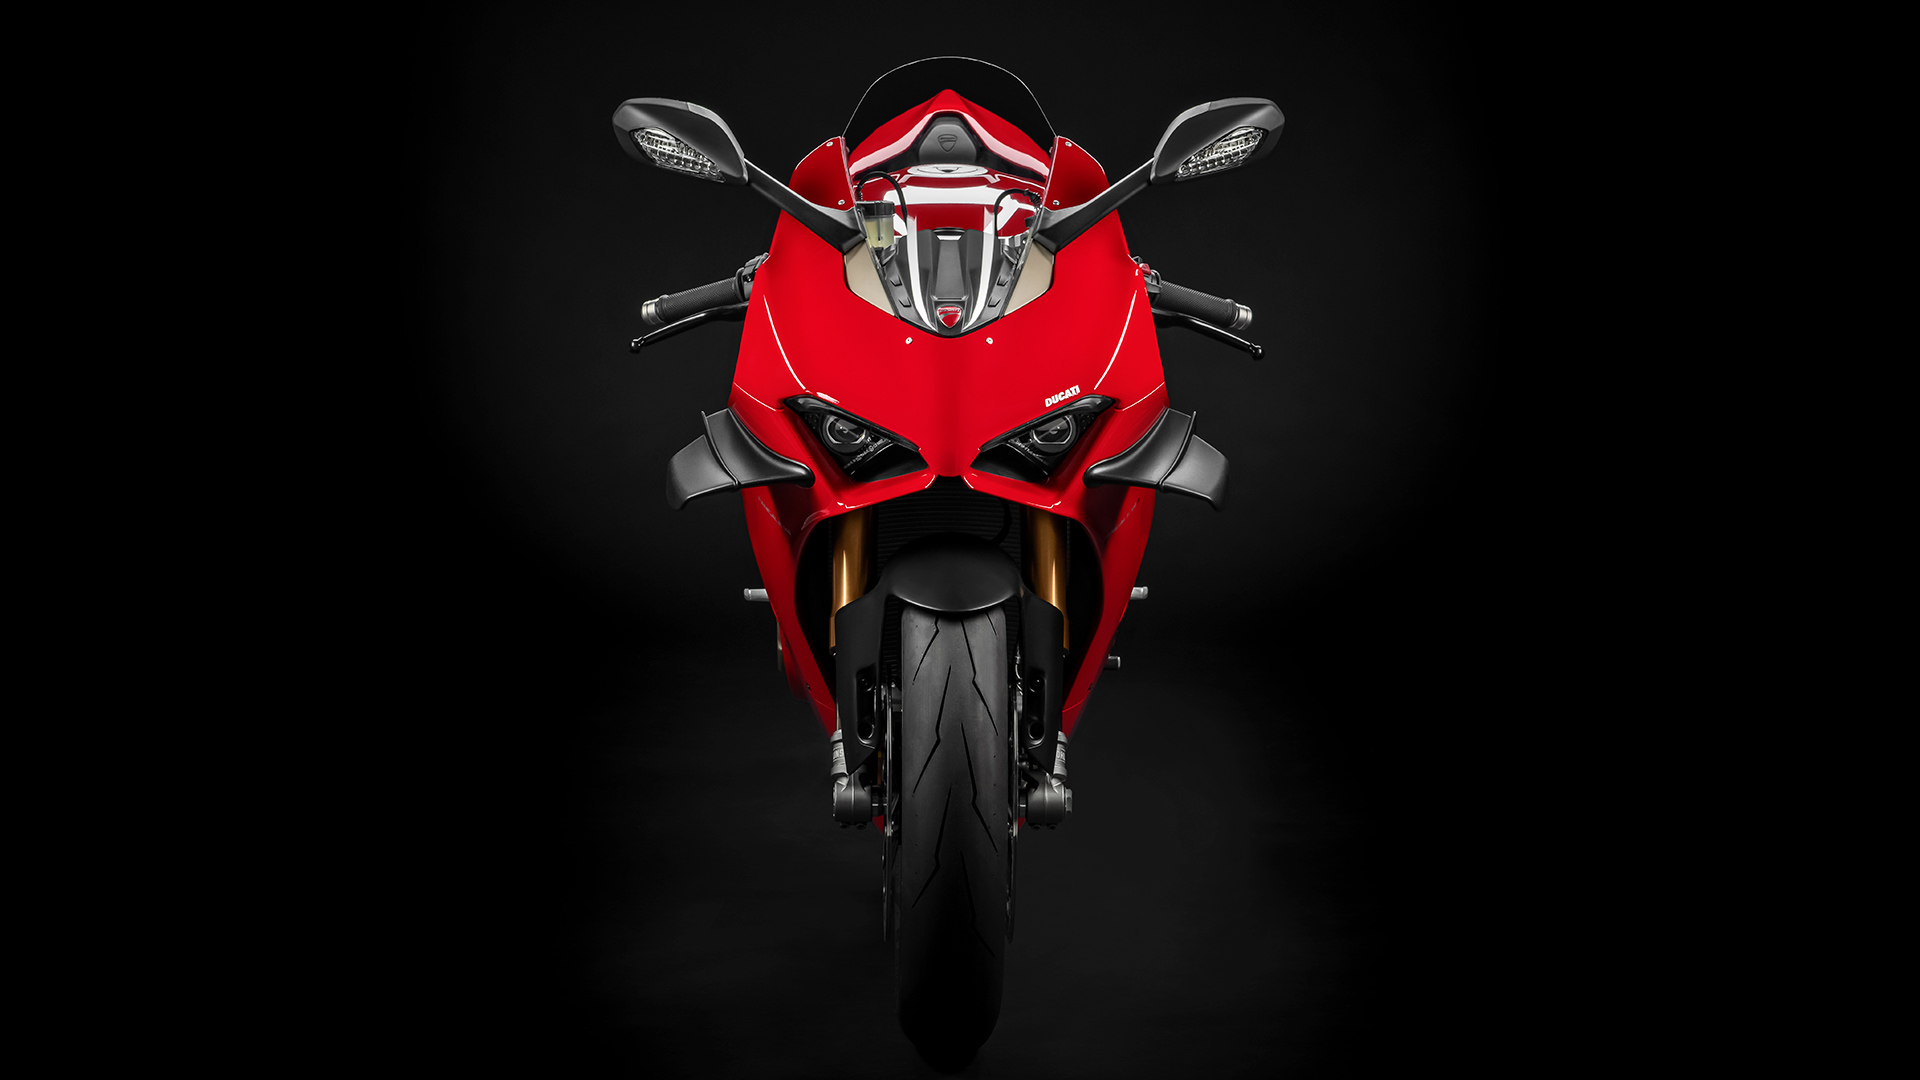 Panigale-V4-S-MY20-Red-04-Gallery-1920x1080